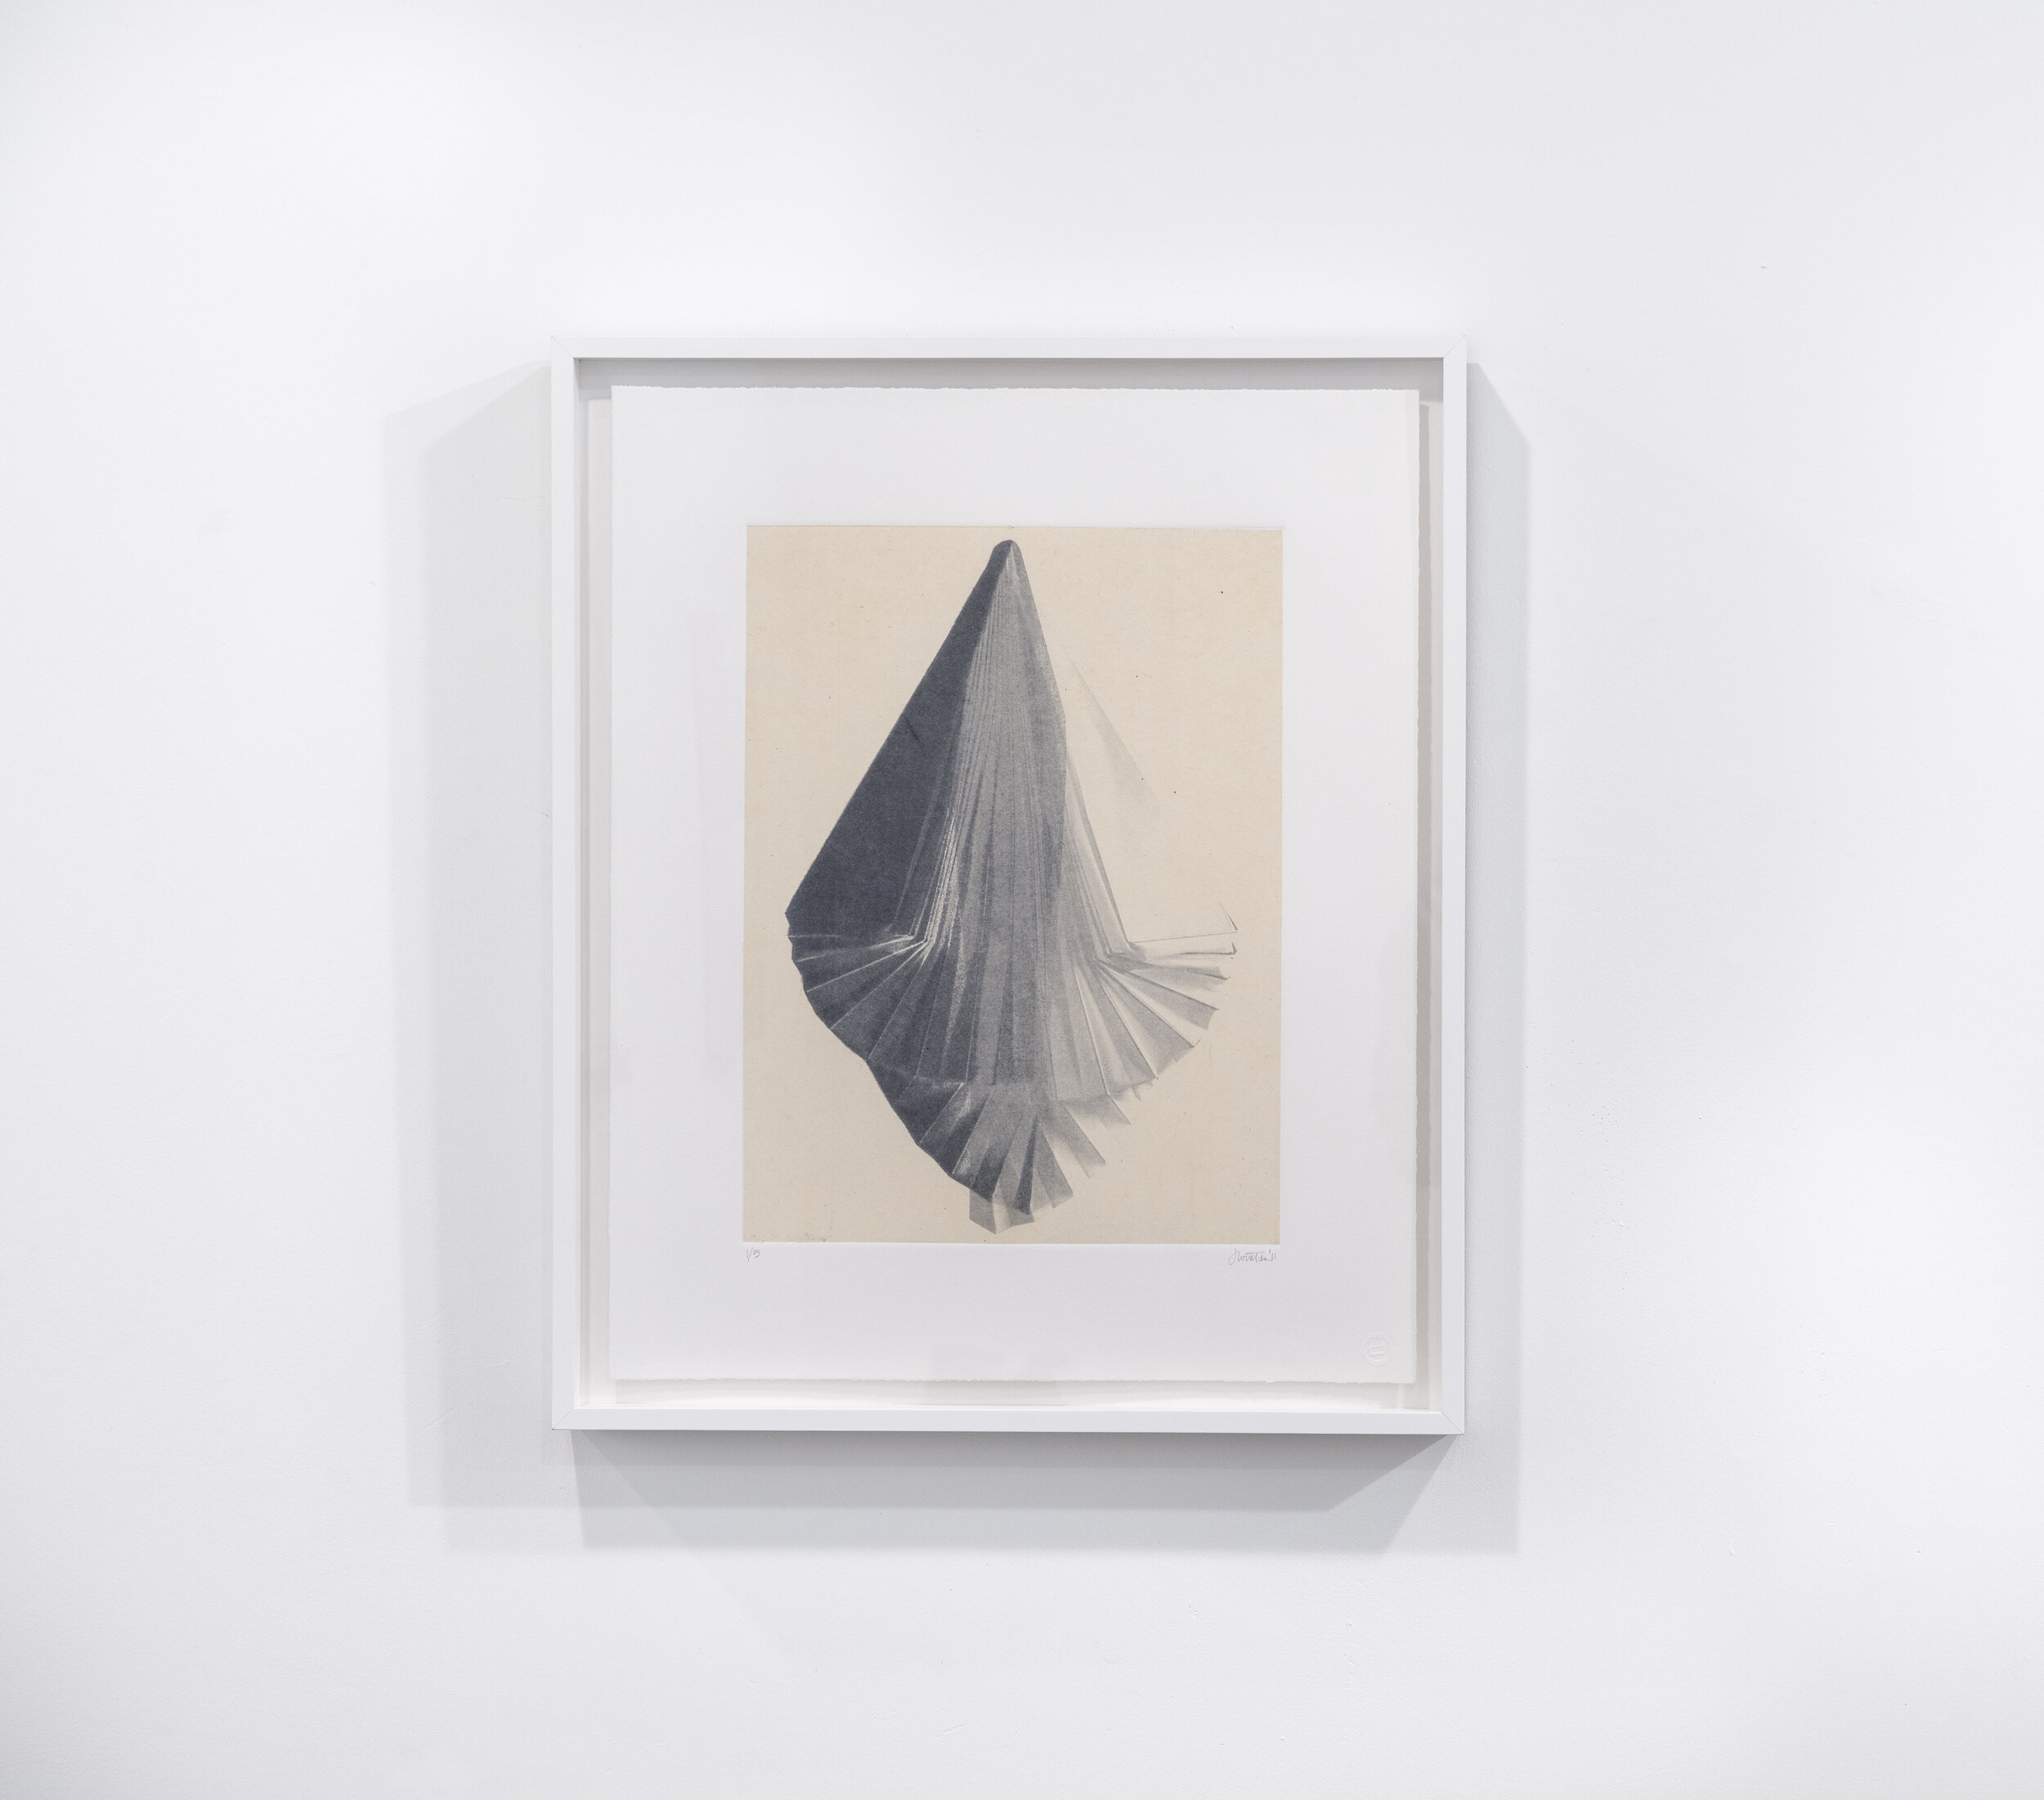 Unfolding II , 2011, Photo polymer gravure with chine colle on BFK paper, Monoprint, 16 x 12 inches